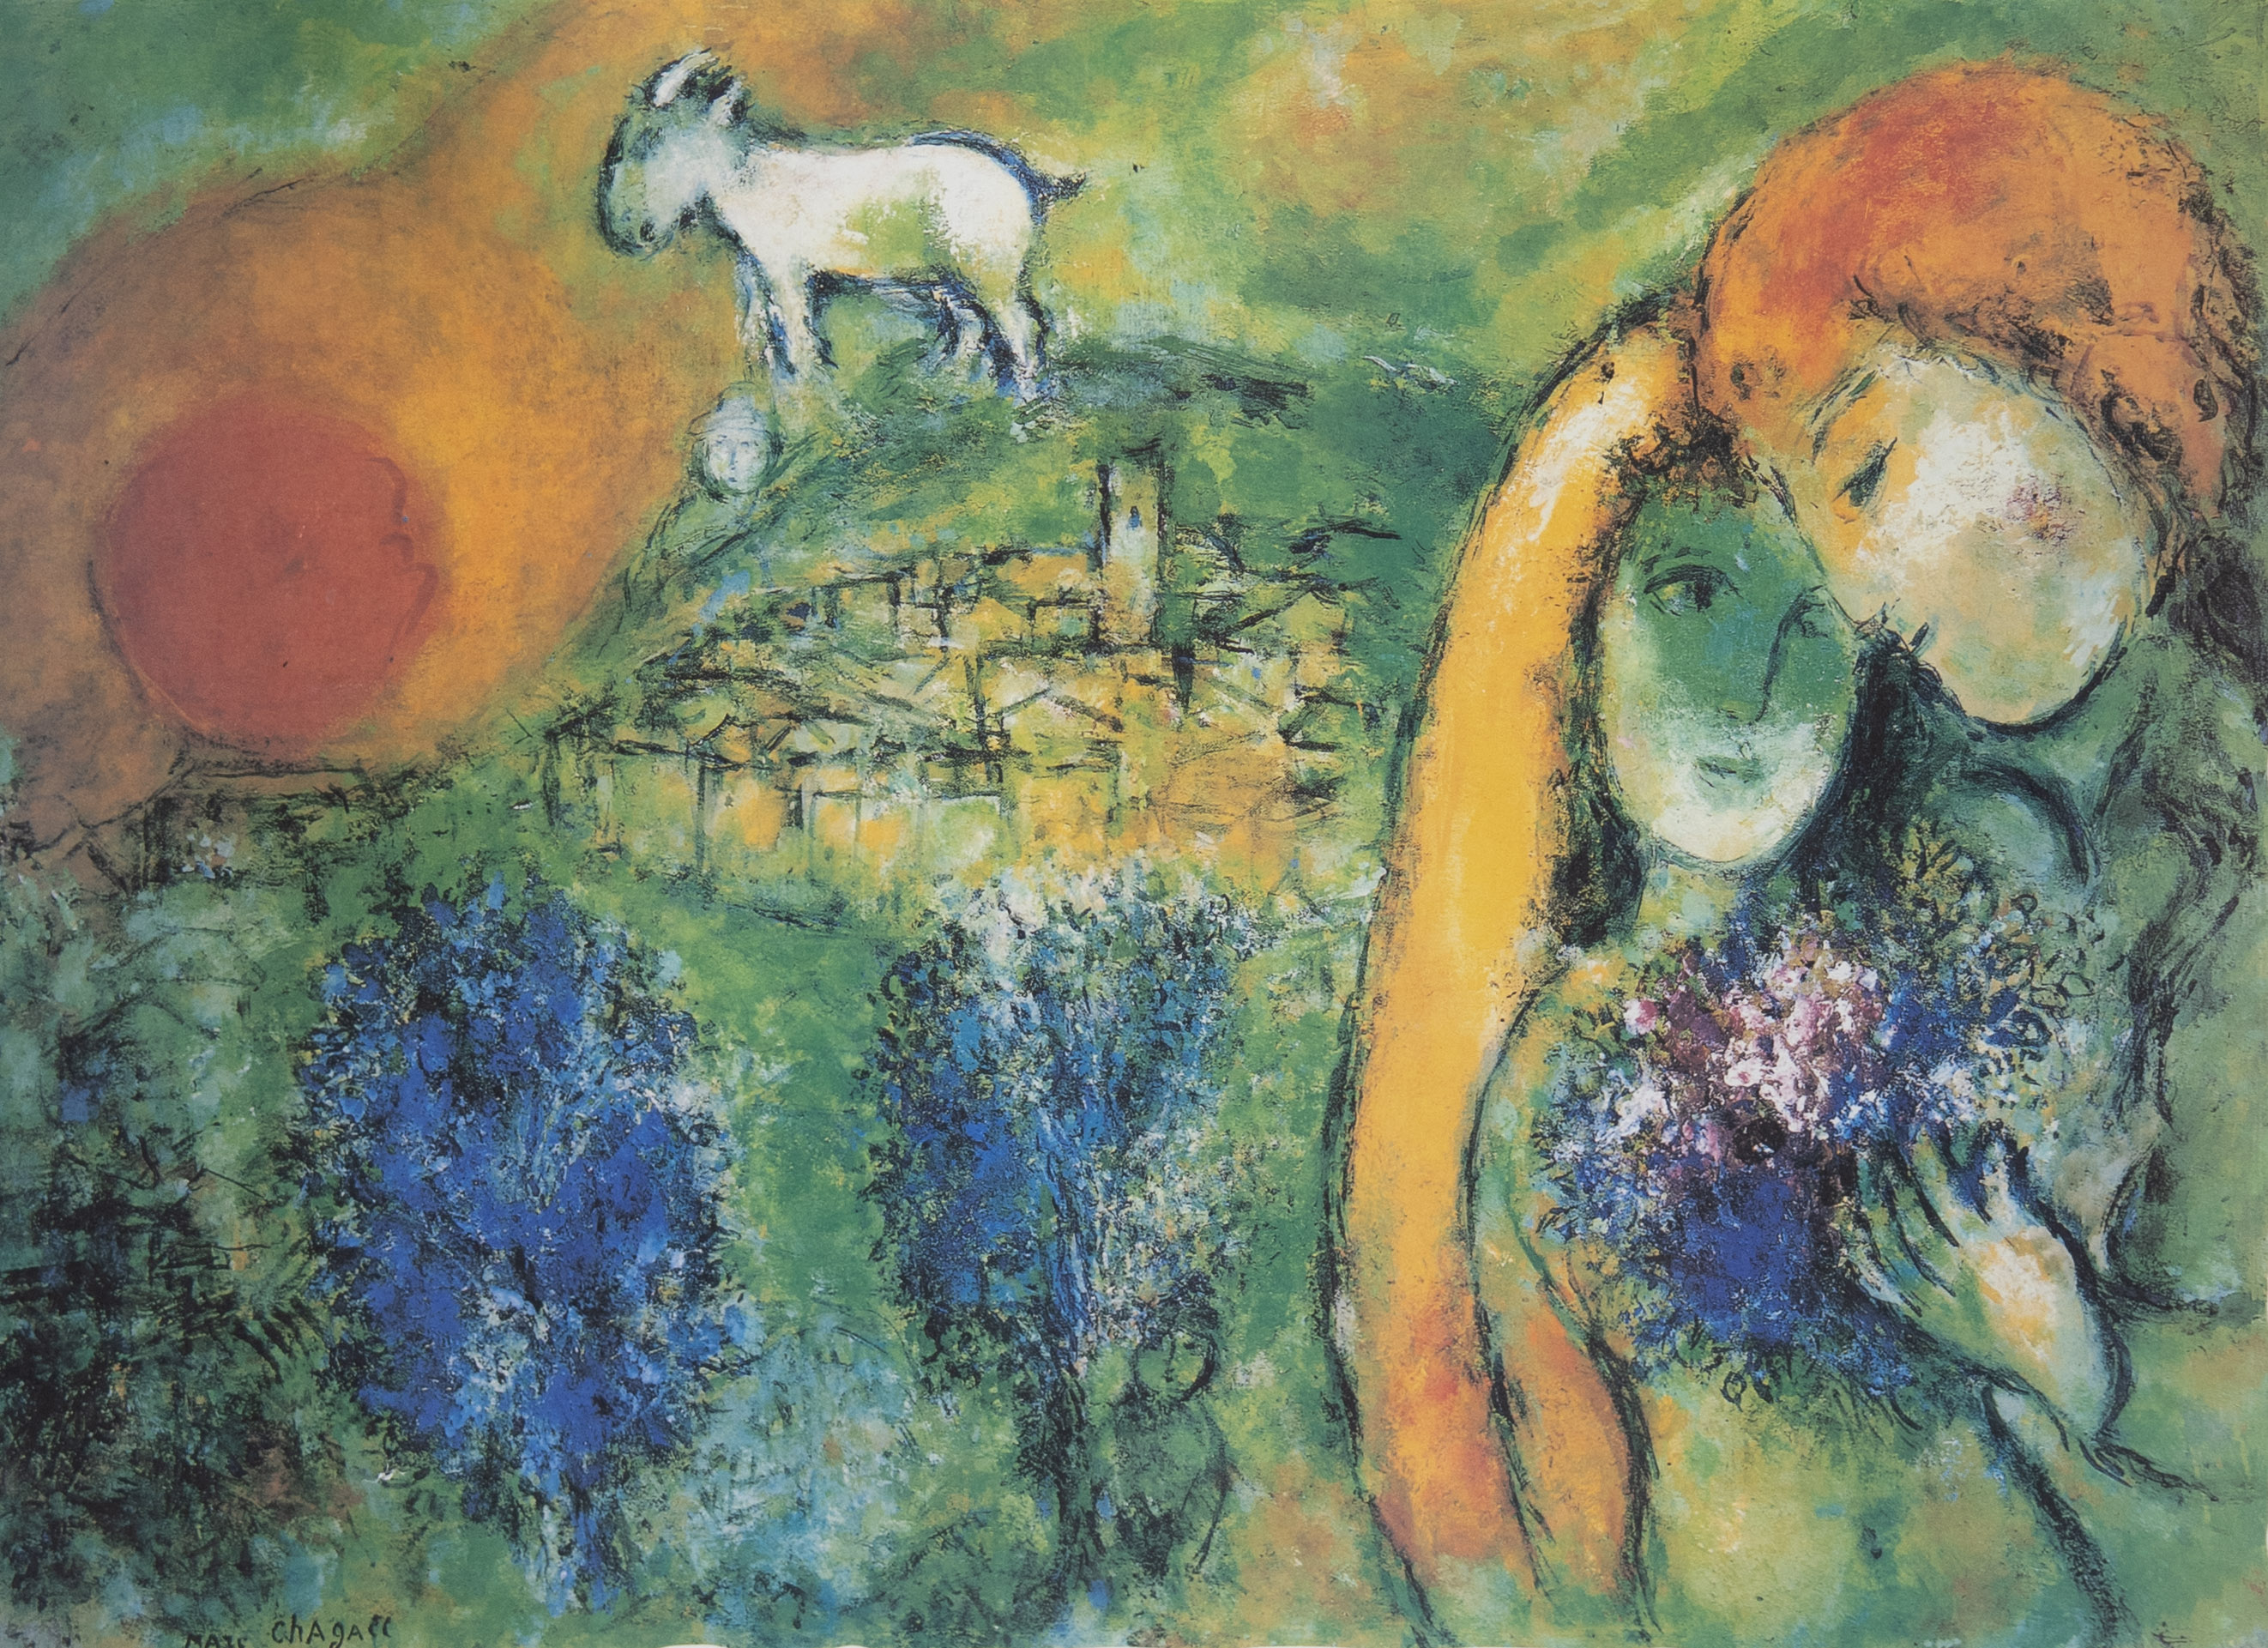 Print/Lithograph LES AMOUREUX DE VENCE by Marc CHAGALL, numbered 371/500 and signed in the plate.